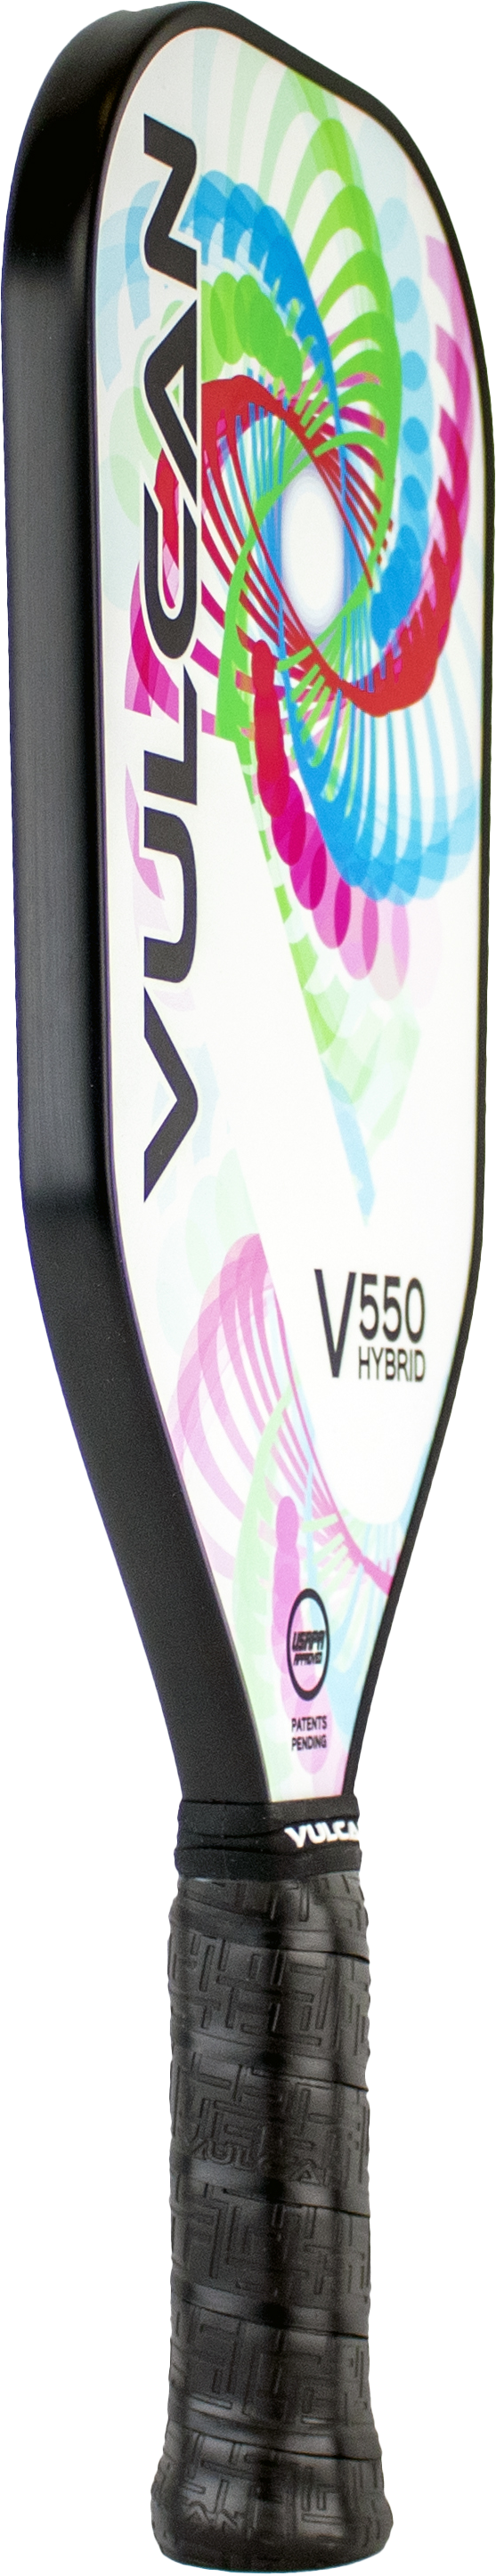 The Vulcan V550 Elongated Pickleball Paddle is a black and white disc with a colorful design on it.